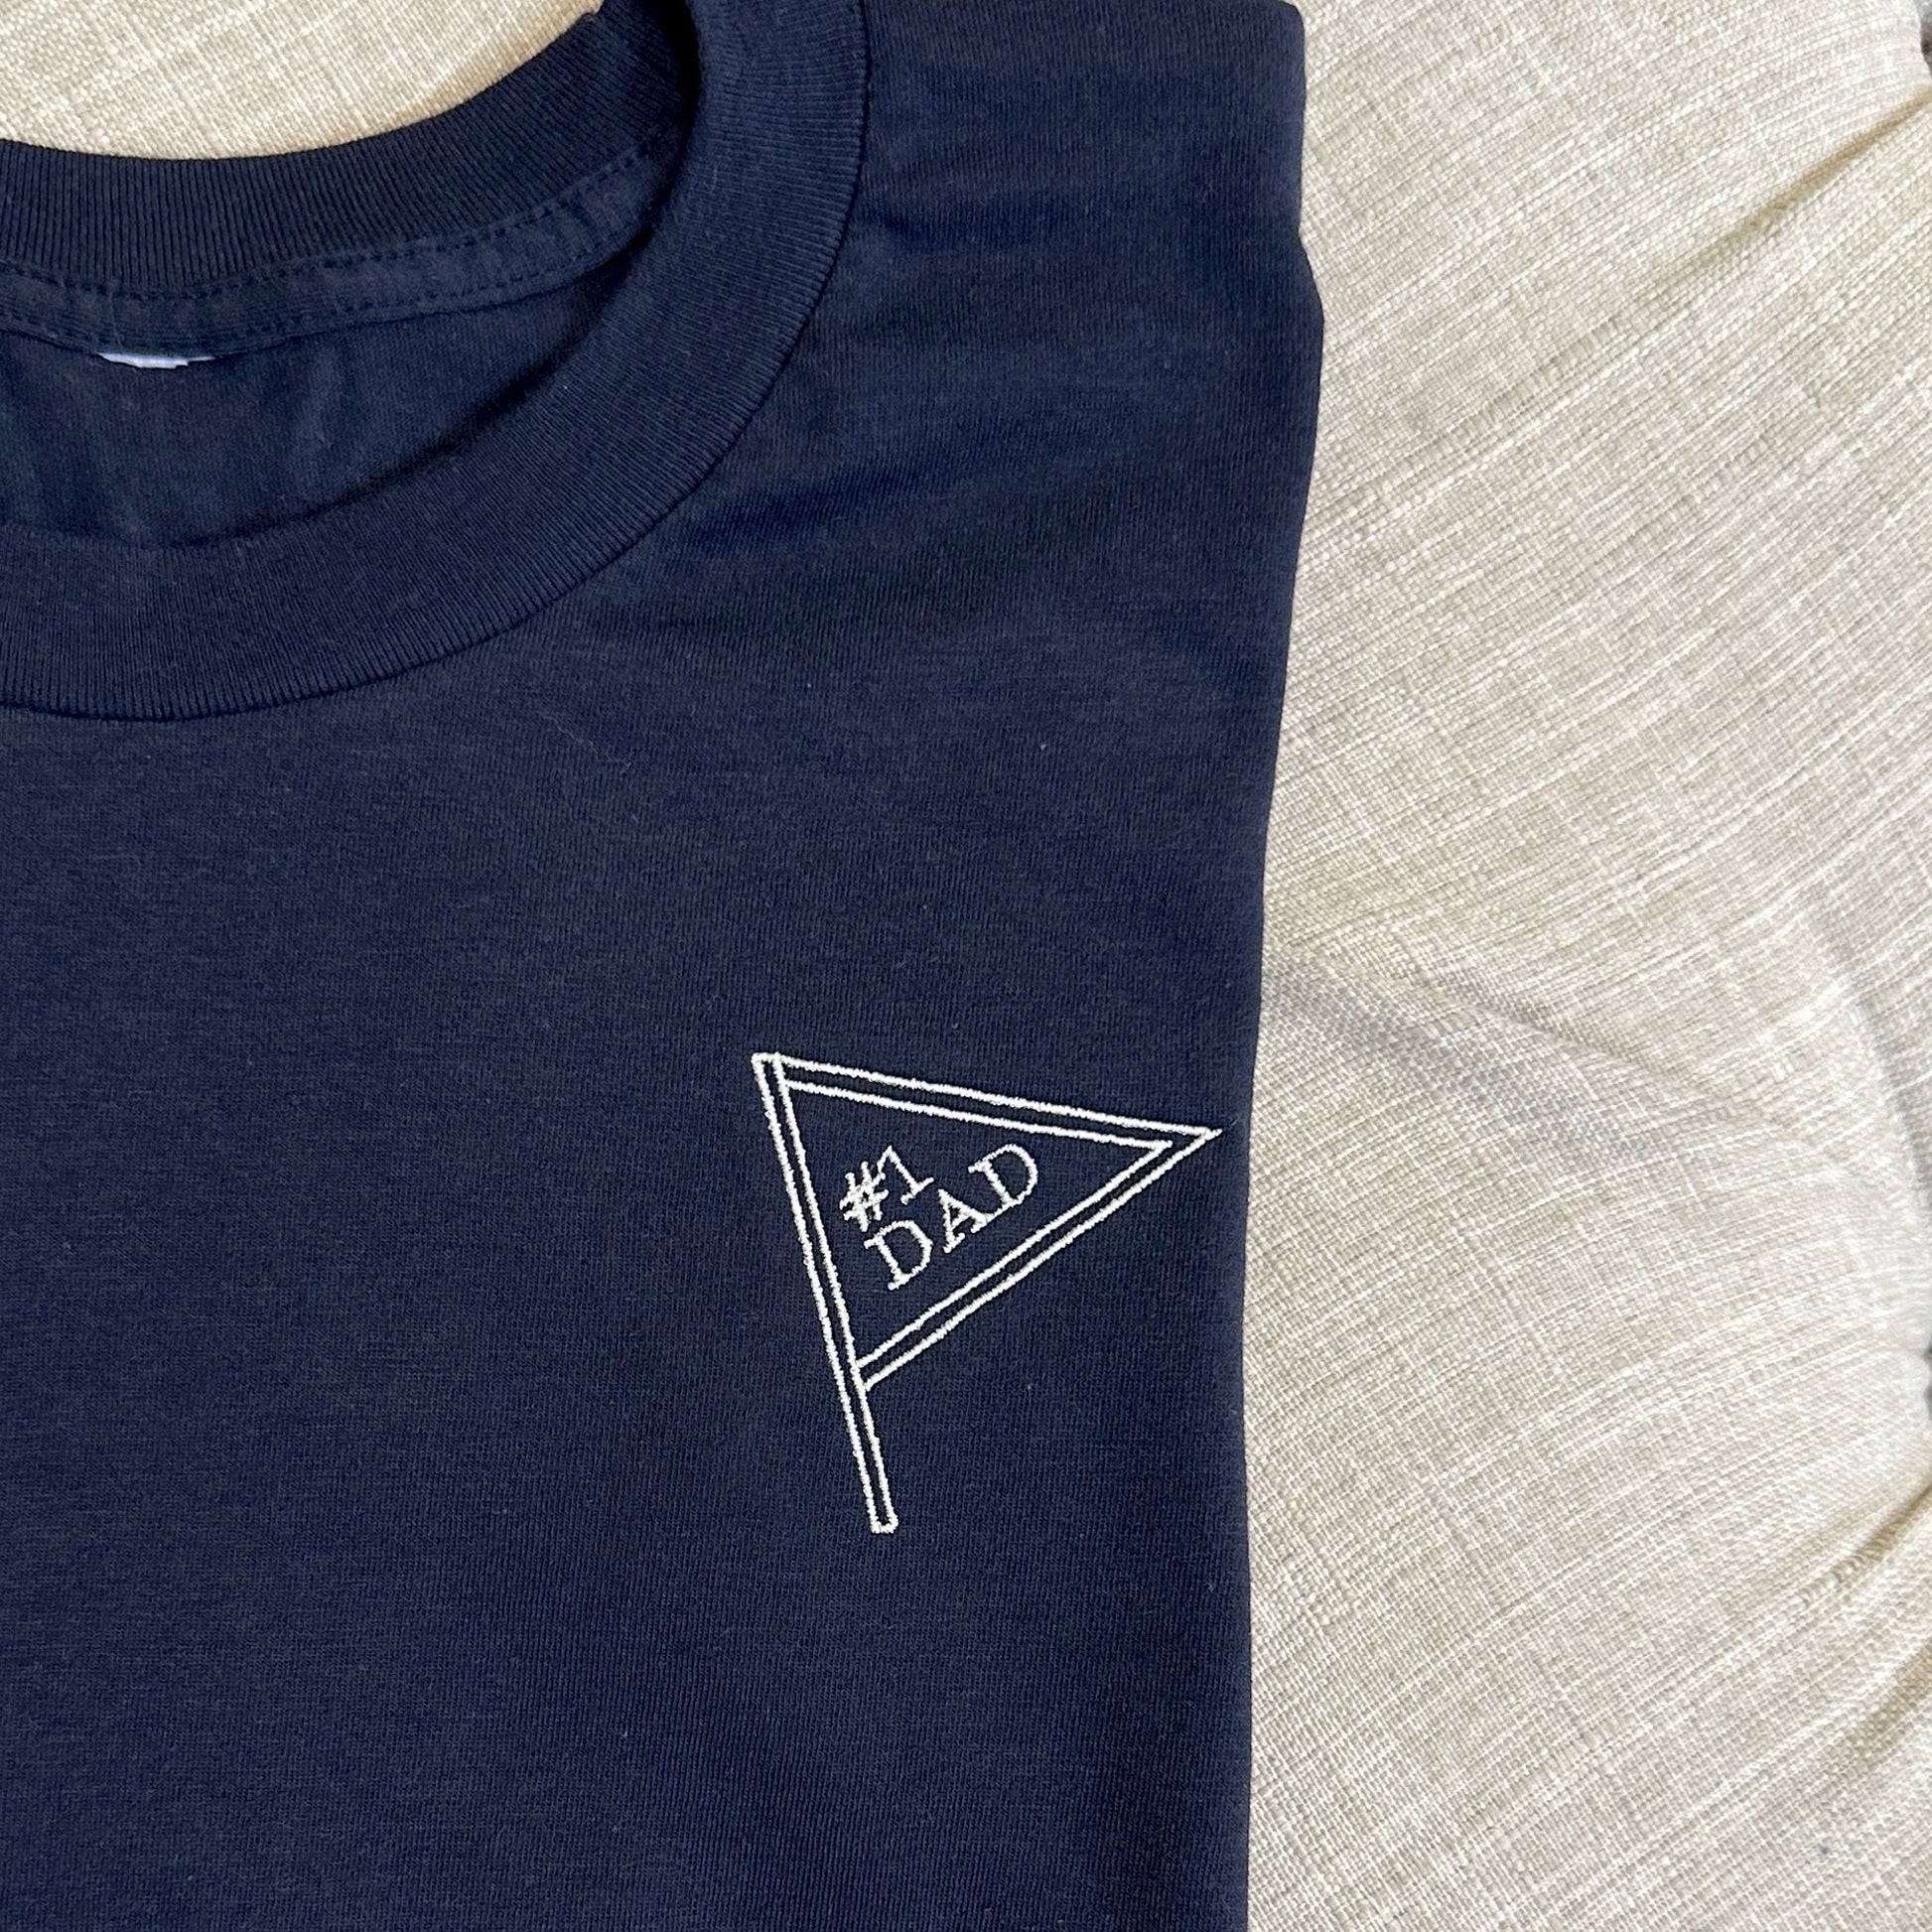 close up of embroidered navy tee with #1 dad inside a mini pennant